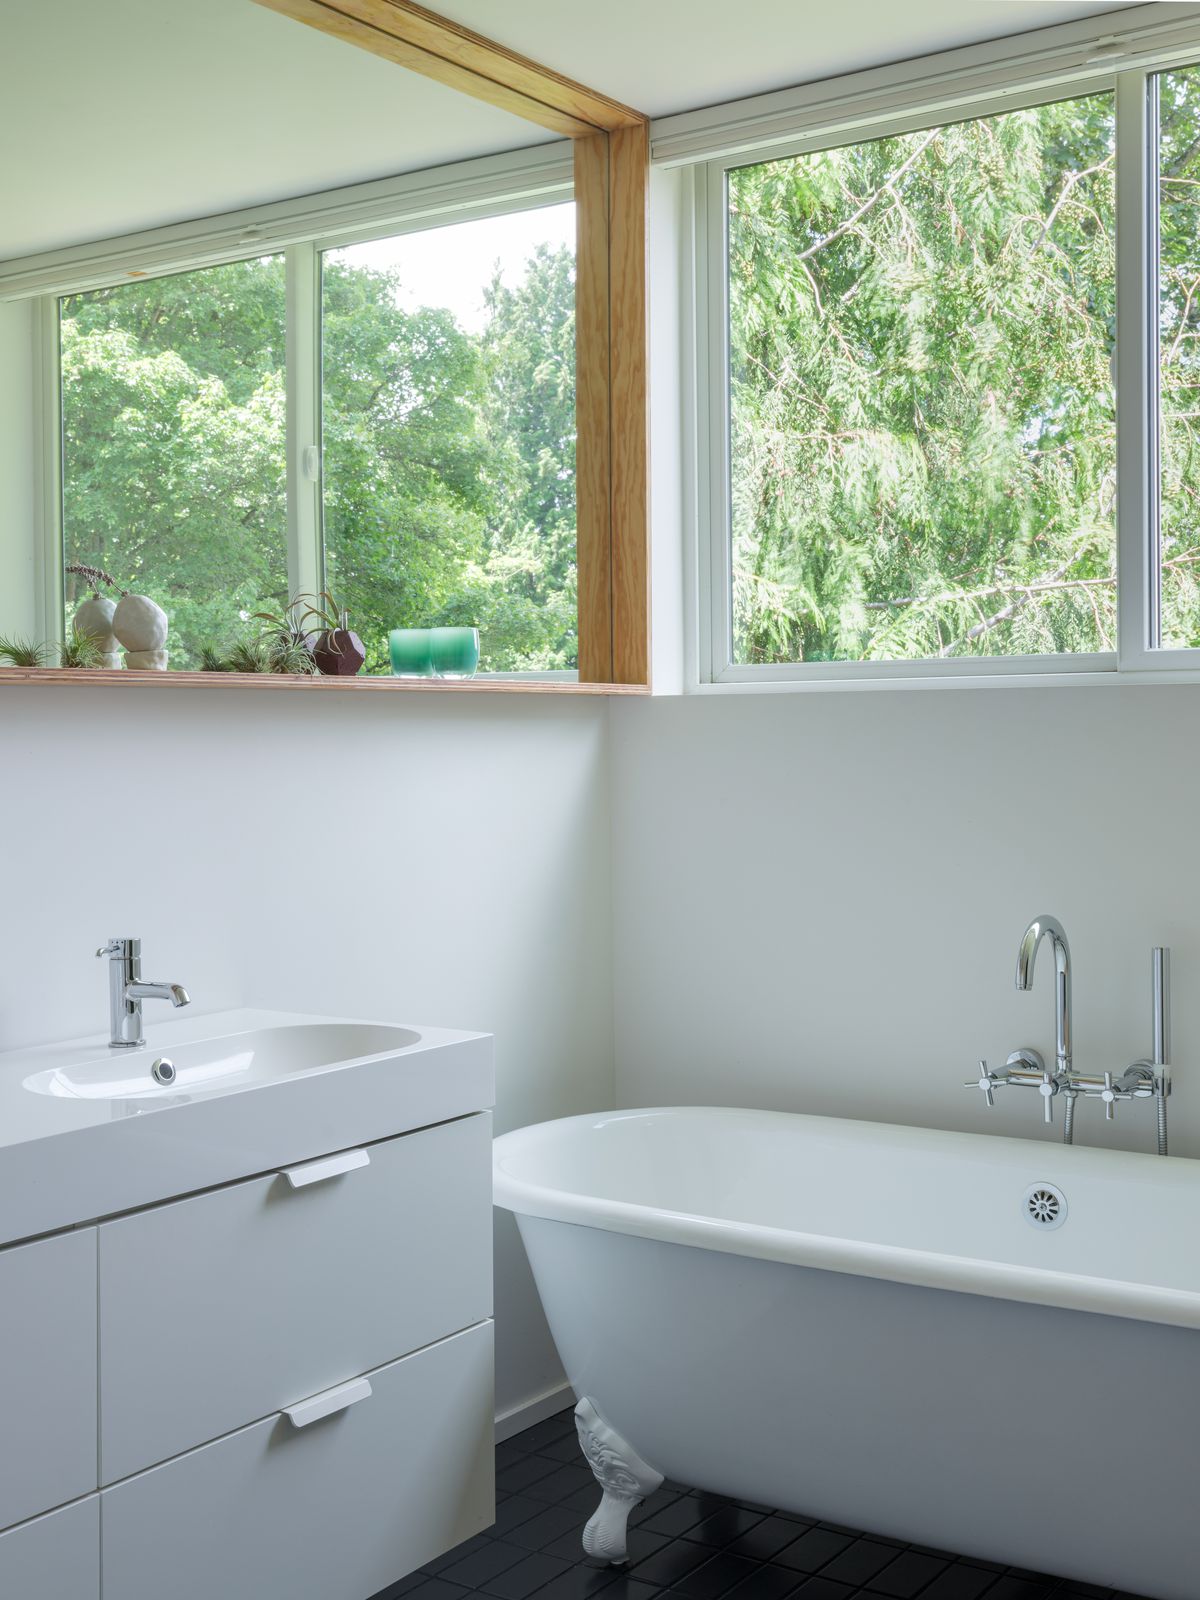 A bathroom with a bathtub, sink, cabinets, and large mirror. There are windows over the bathtub which are overlooking a view with trees.